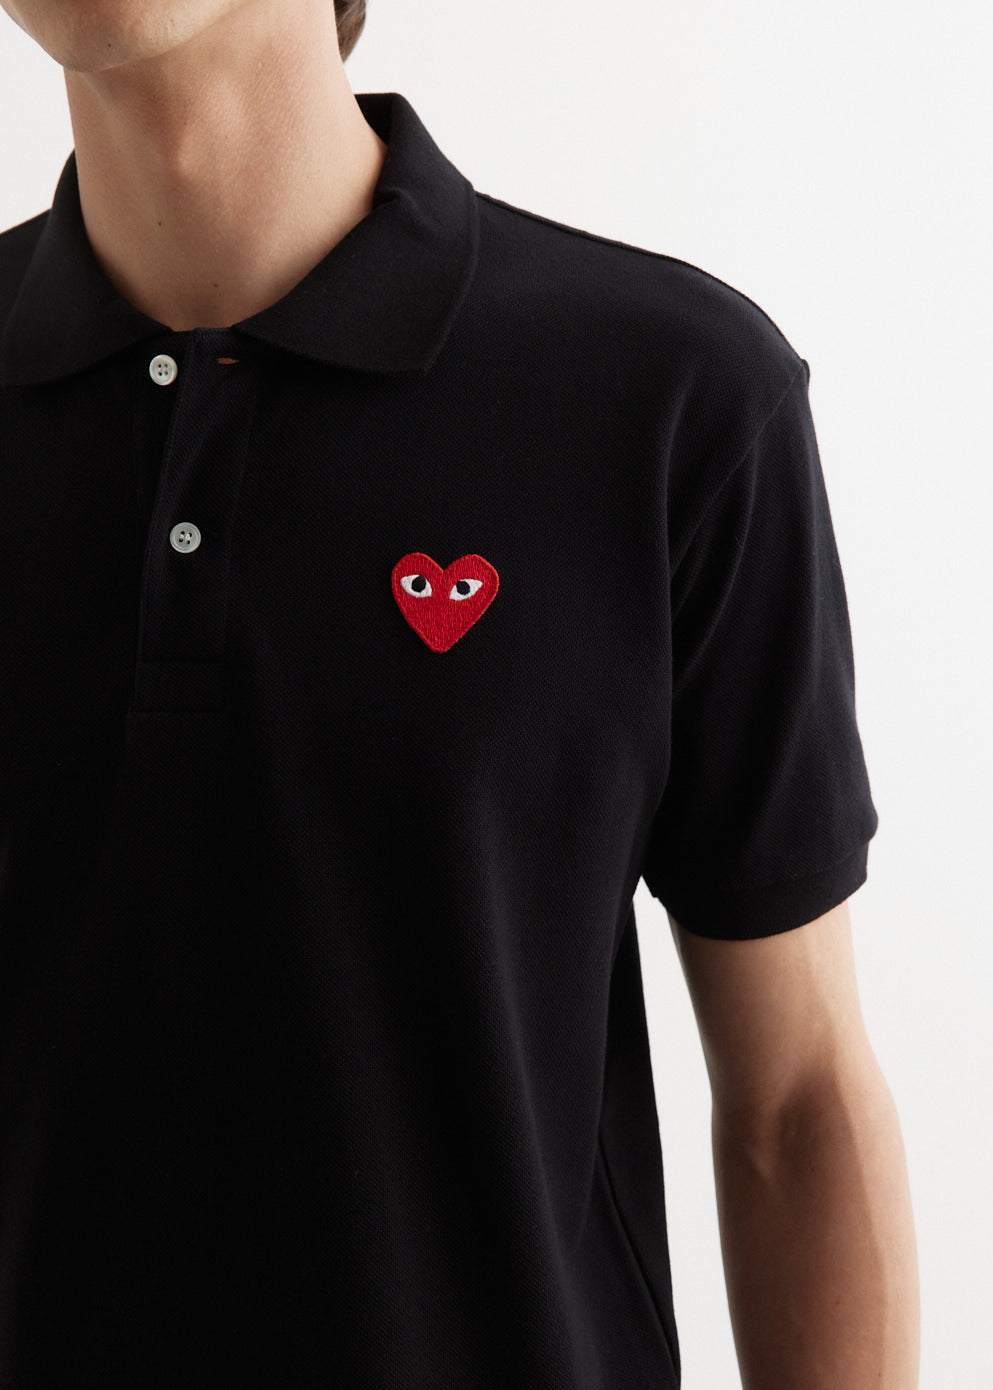 T006 Red Heart Polo Shirt